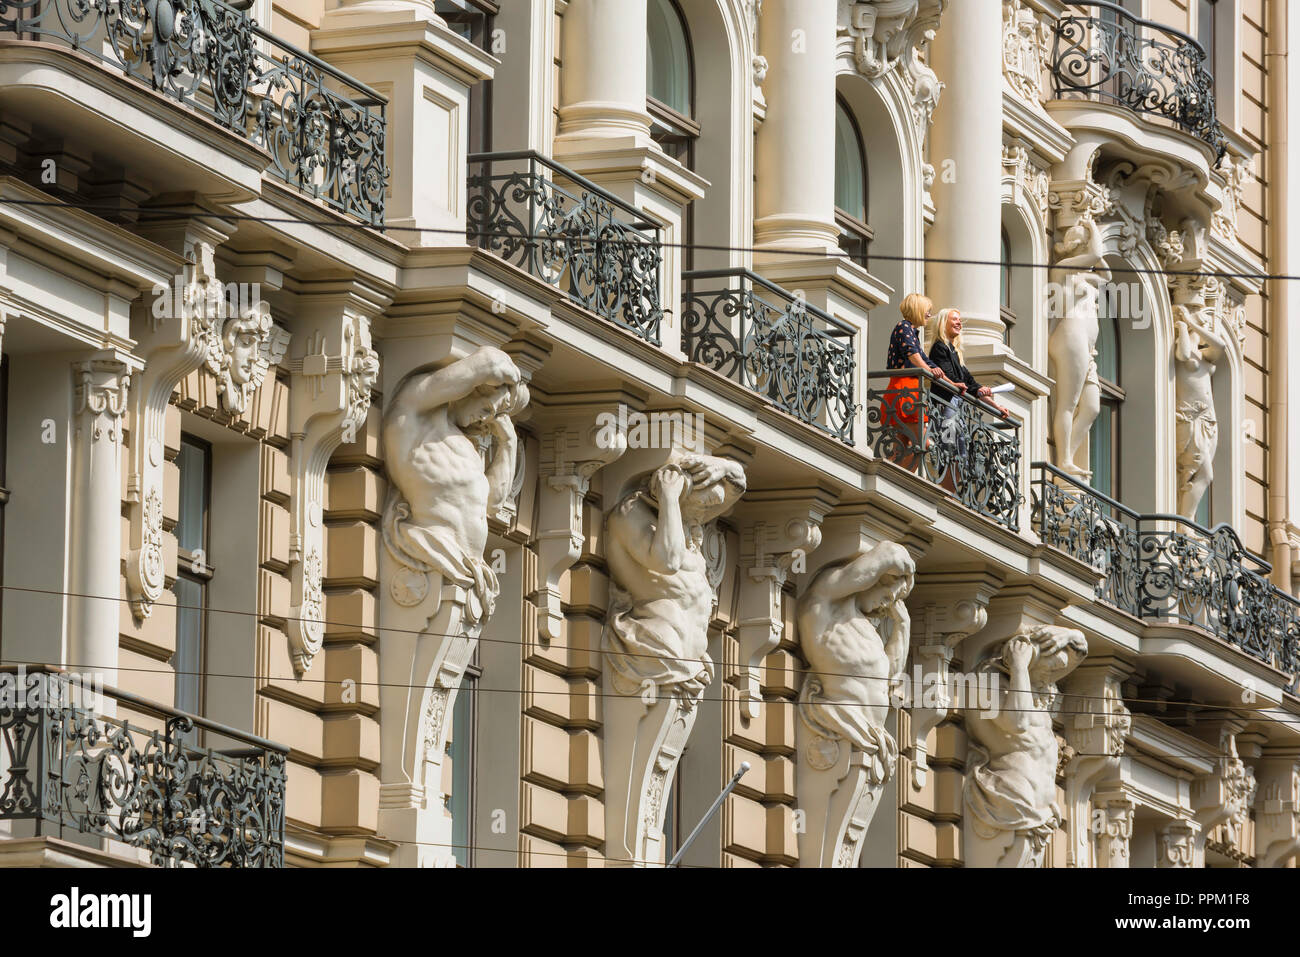 Riga art nouveau architecture, view of two women standing on the balcony of a building in Elizabetes Iela in the the Art Nouveau district of Riga. Stock Photo